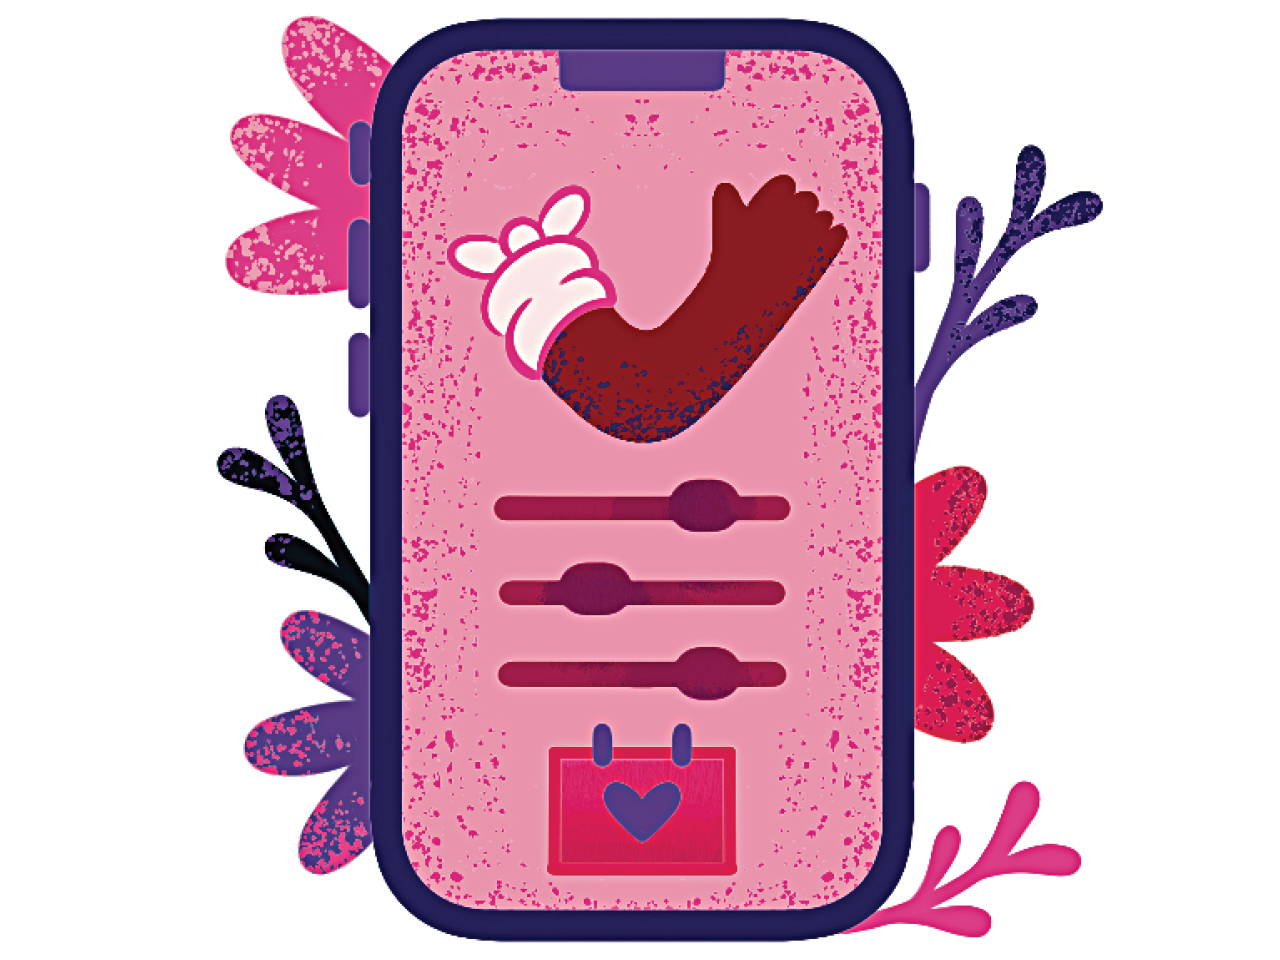 An illustration of an iPhone screen with an app interface of a calendar and tracking modules, with pink decorative flowers behind the phone.